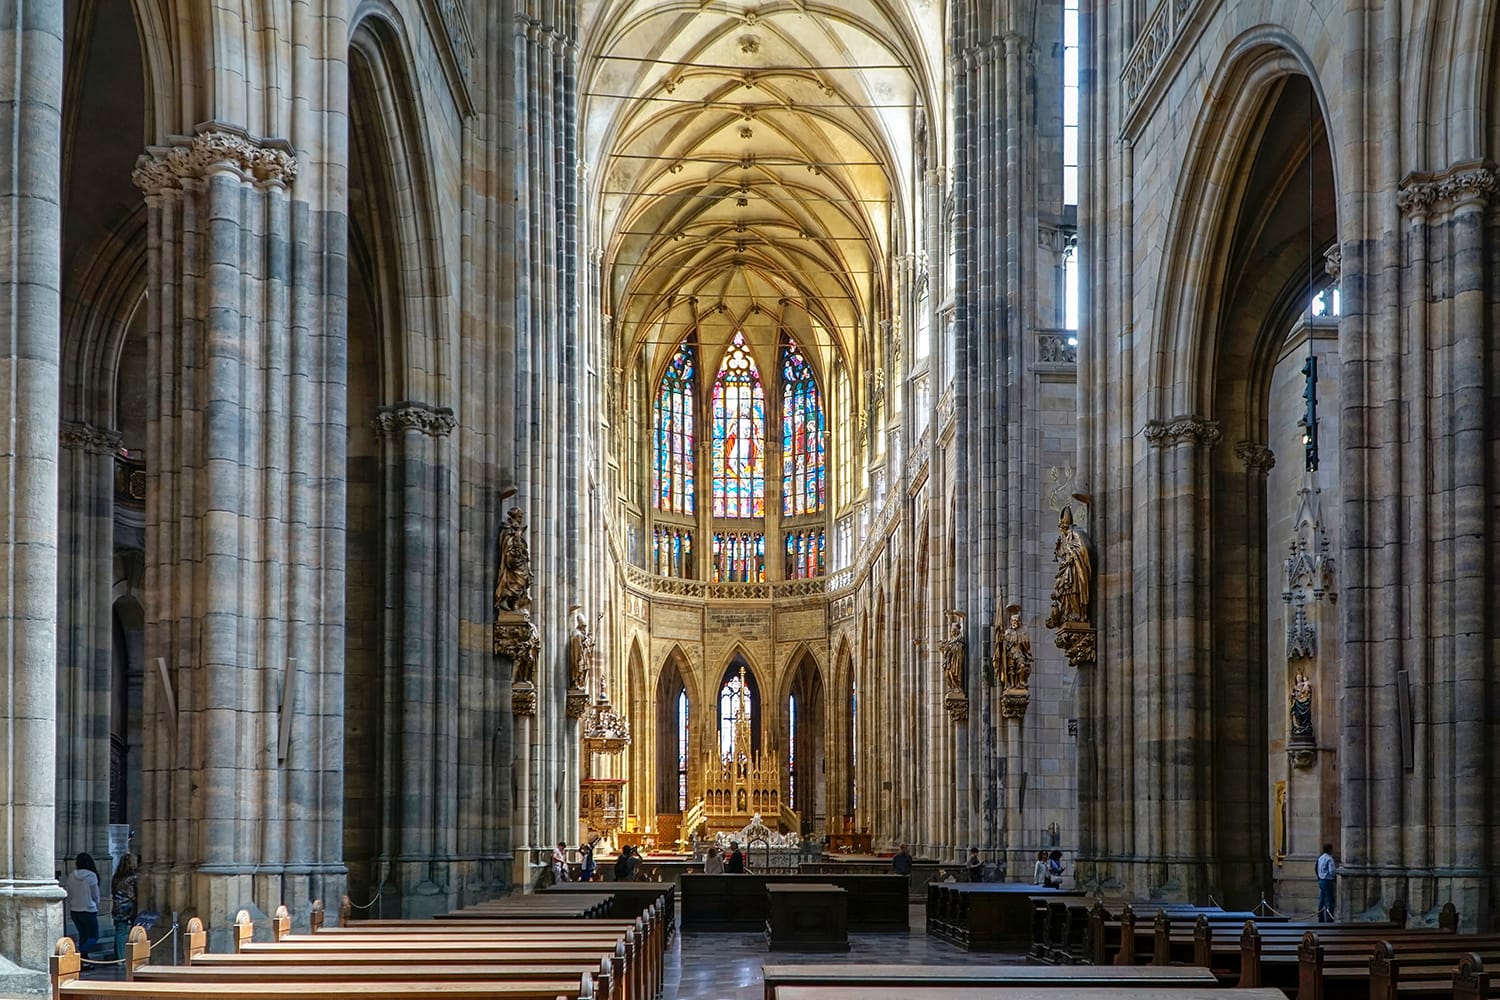 Interior detail from St. Vitus Cathedral in Prague